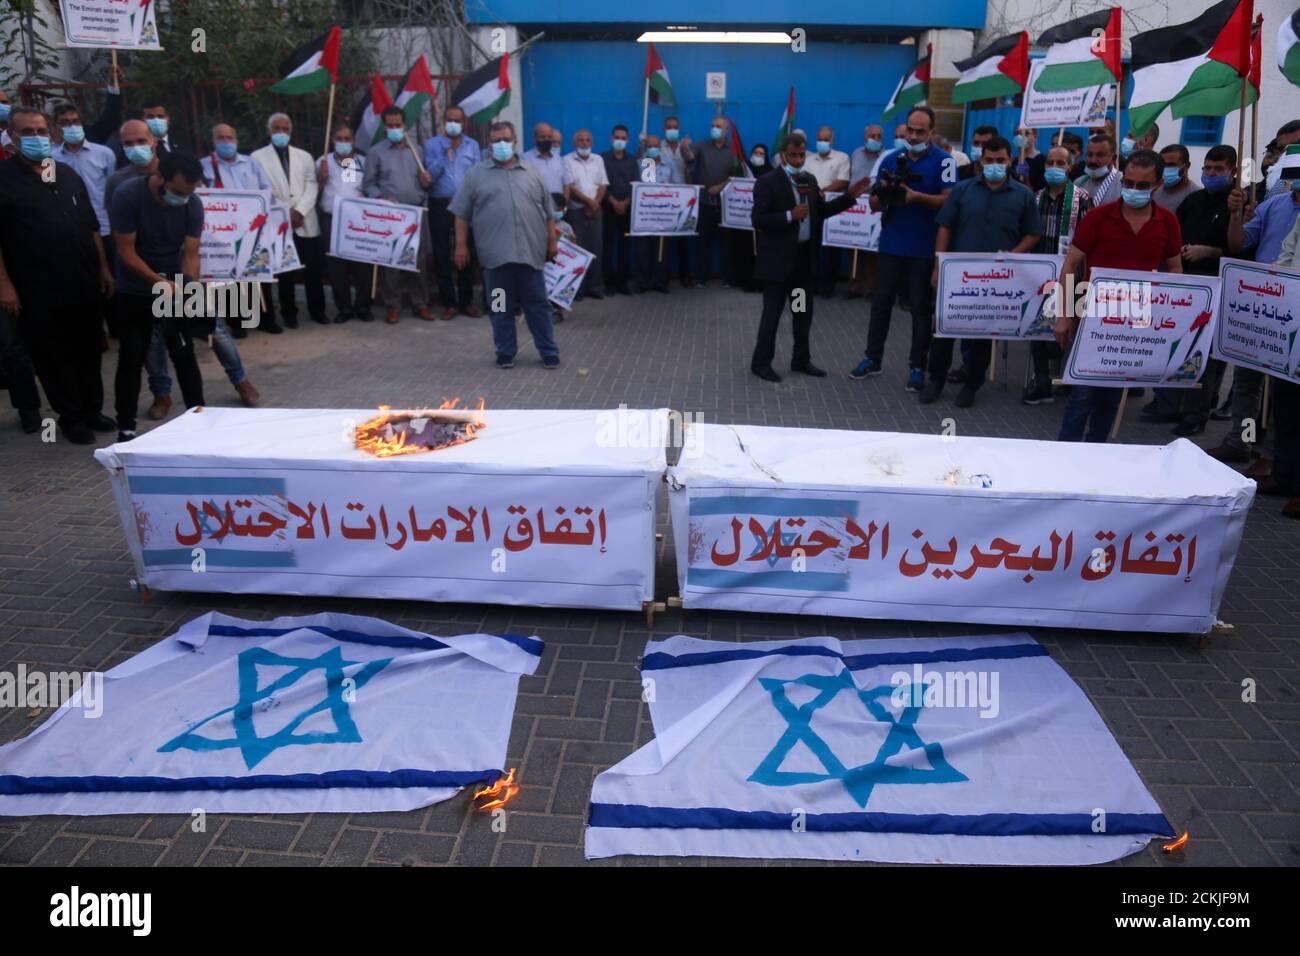 September 15, 2020: Gaza, Palestine.15 September 2020. Palestinians hold a protest outside the UN headquarters in Gaza City as the UAE and Bahrain sign their normalisation agreements with Israel in Washington. Protesters burnt the Israeli flag and carried banners denouncing the deal as ''the deal of shame'', and the normalisation of ties as a betrayal by the Arab states. While the White House has described the accords as a ''declaration of peace'', Palestinians have fully rejected them as they feel even more isolated in resisting the Israeli occupation, while their leaders have called for a l Stock Photo